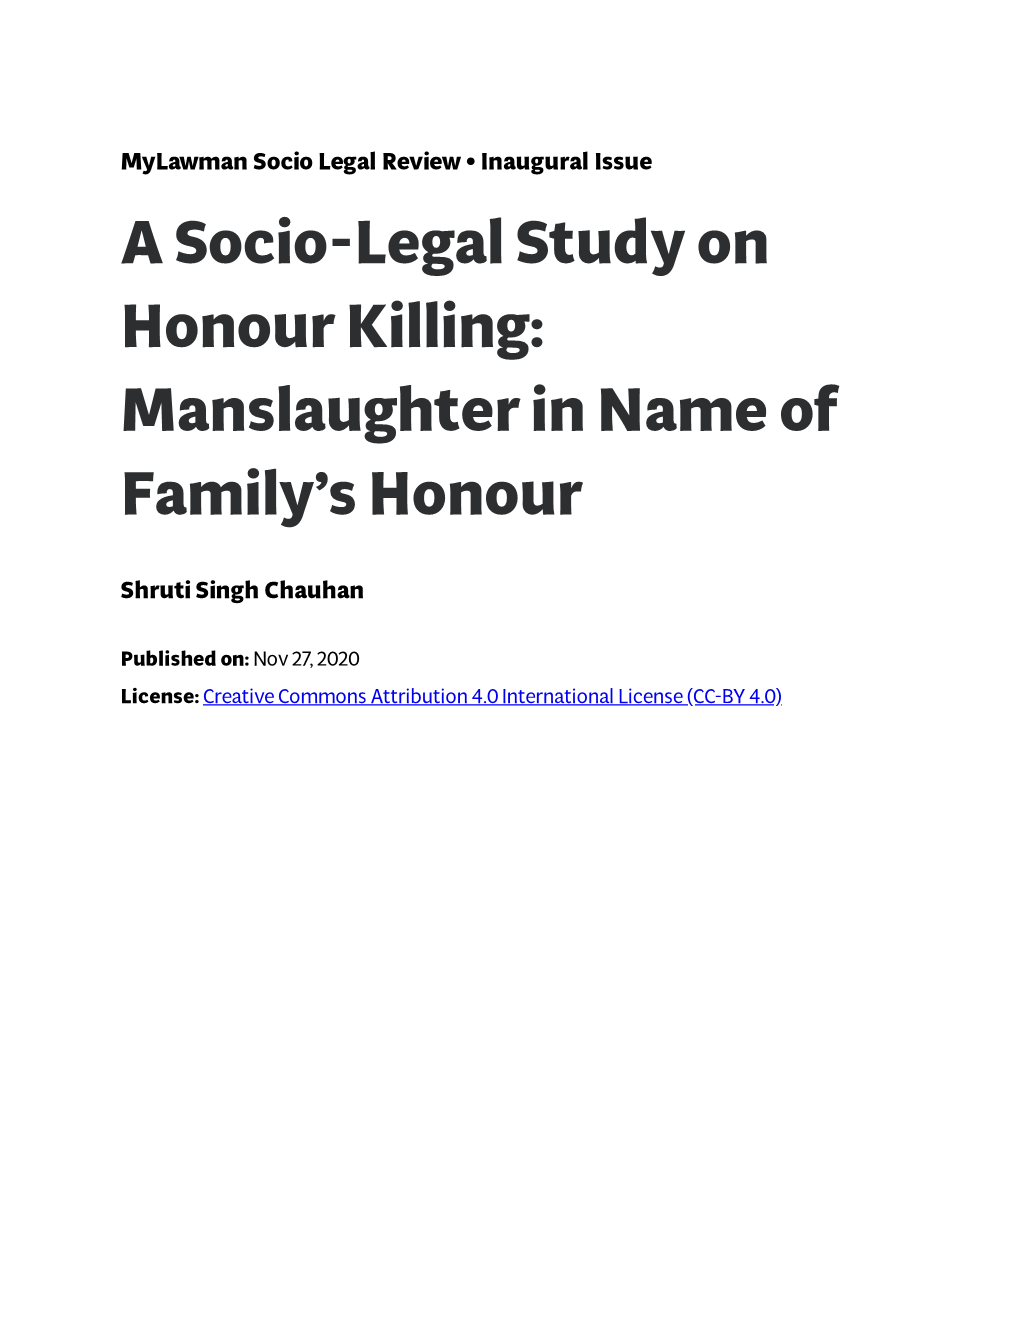 A Socio-Legal Study on Honour Killing: Manslaughter in Name of Family’S Honour